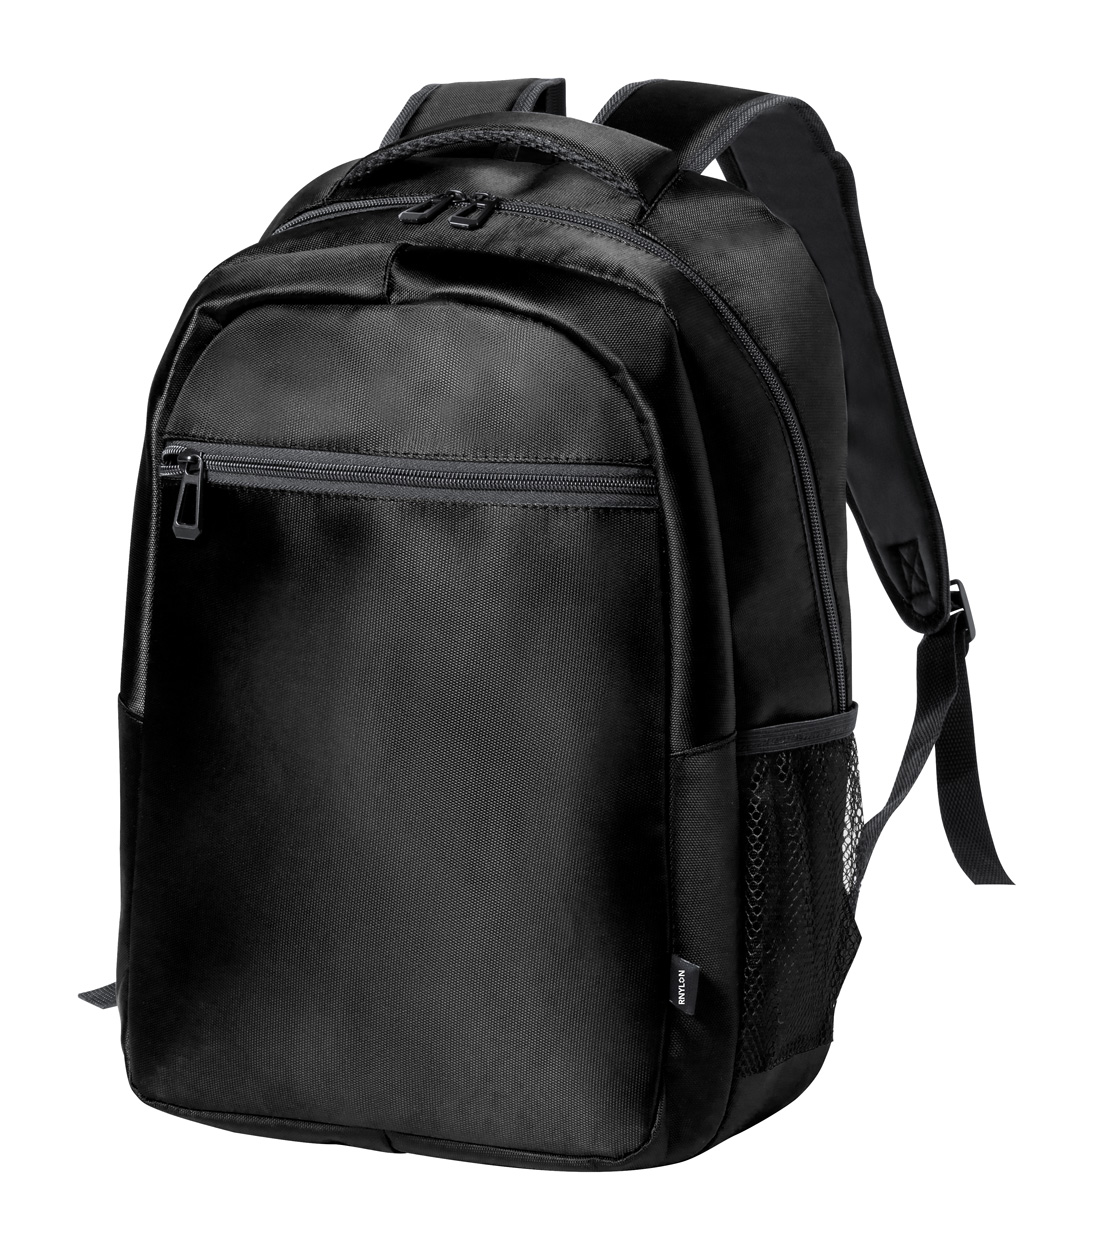 Polyester backpack POLACK in RPET material